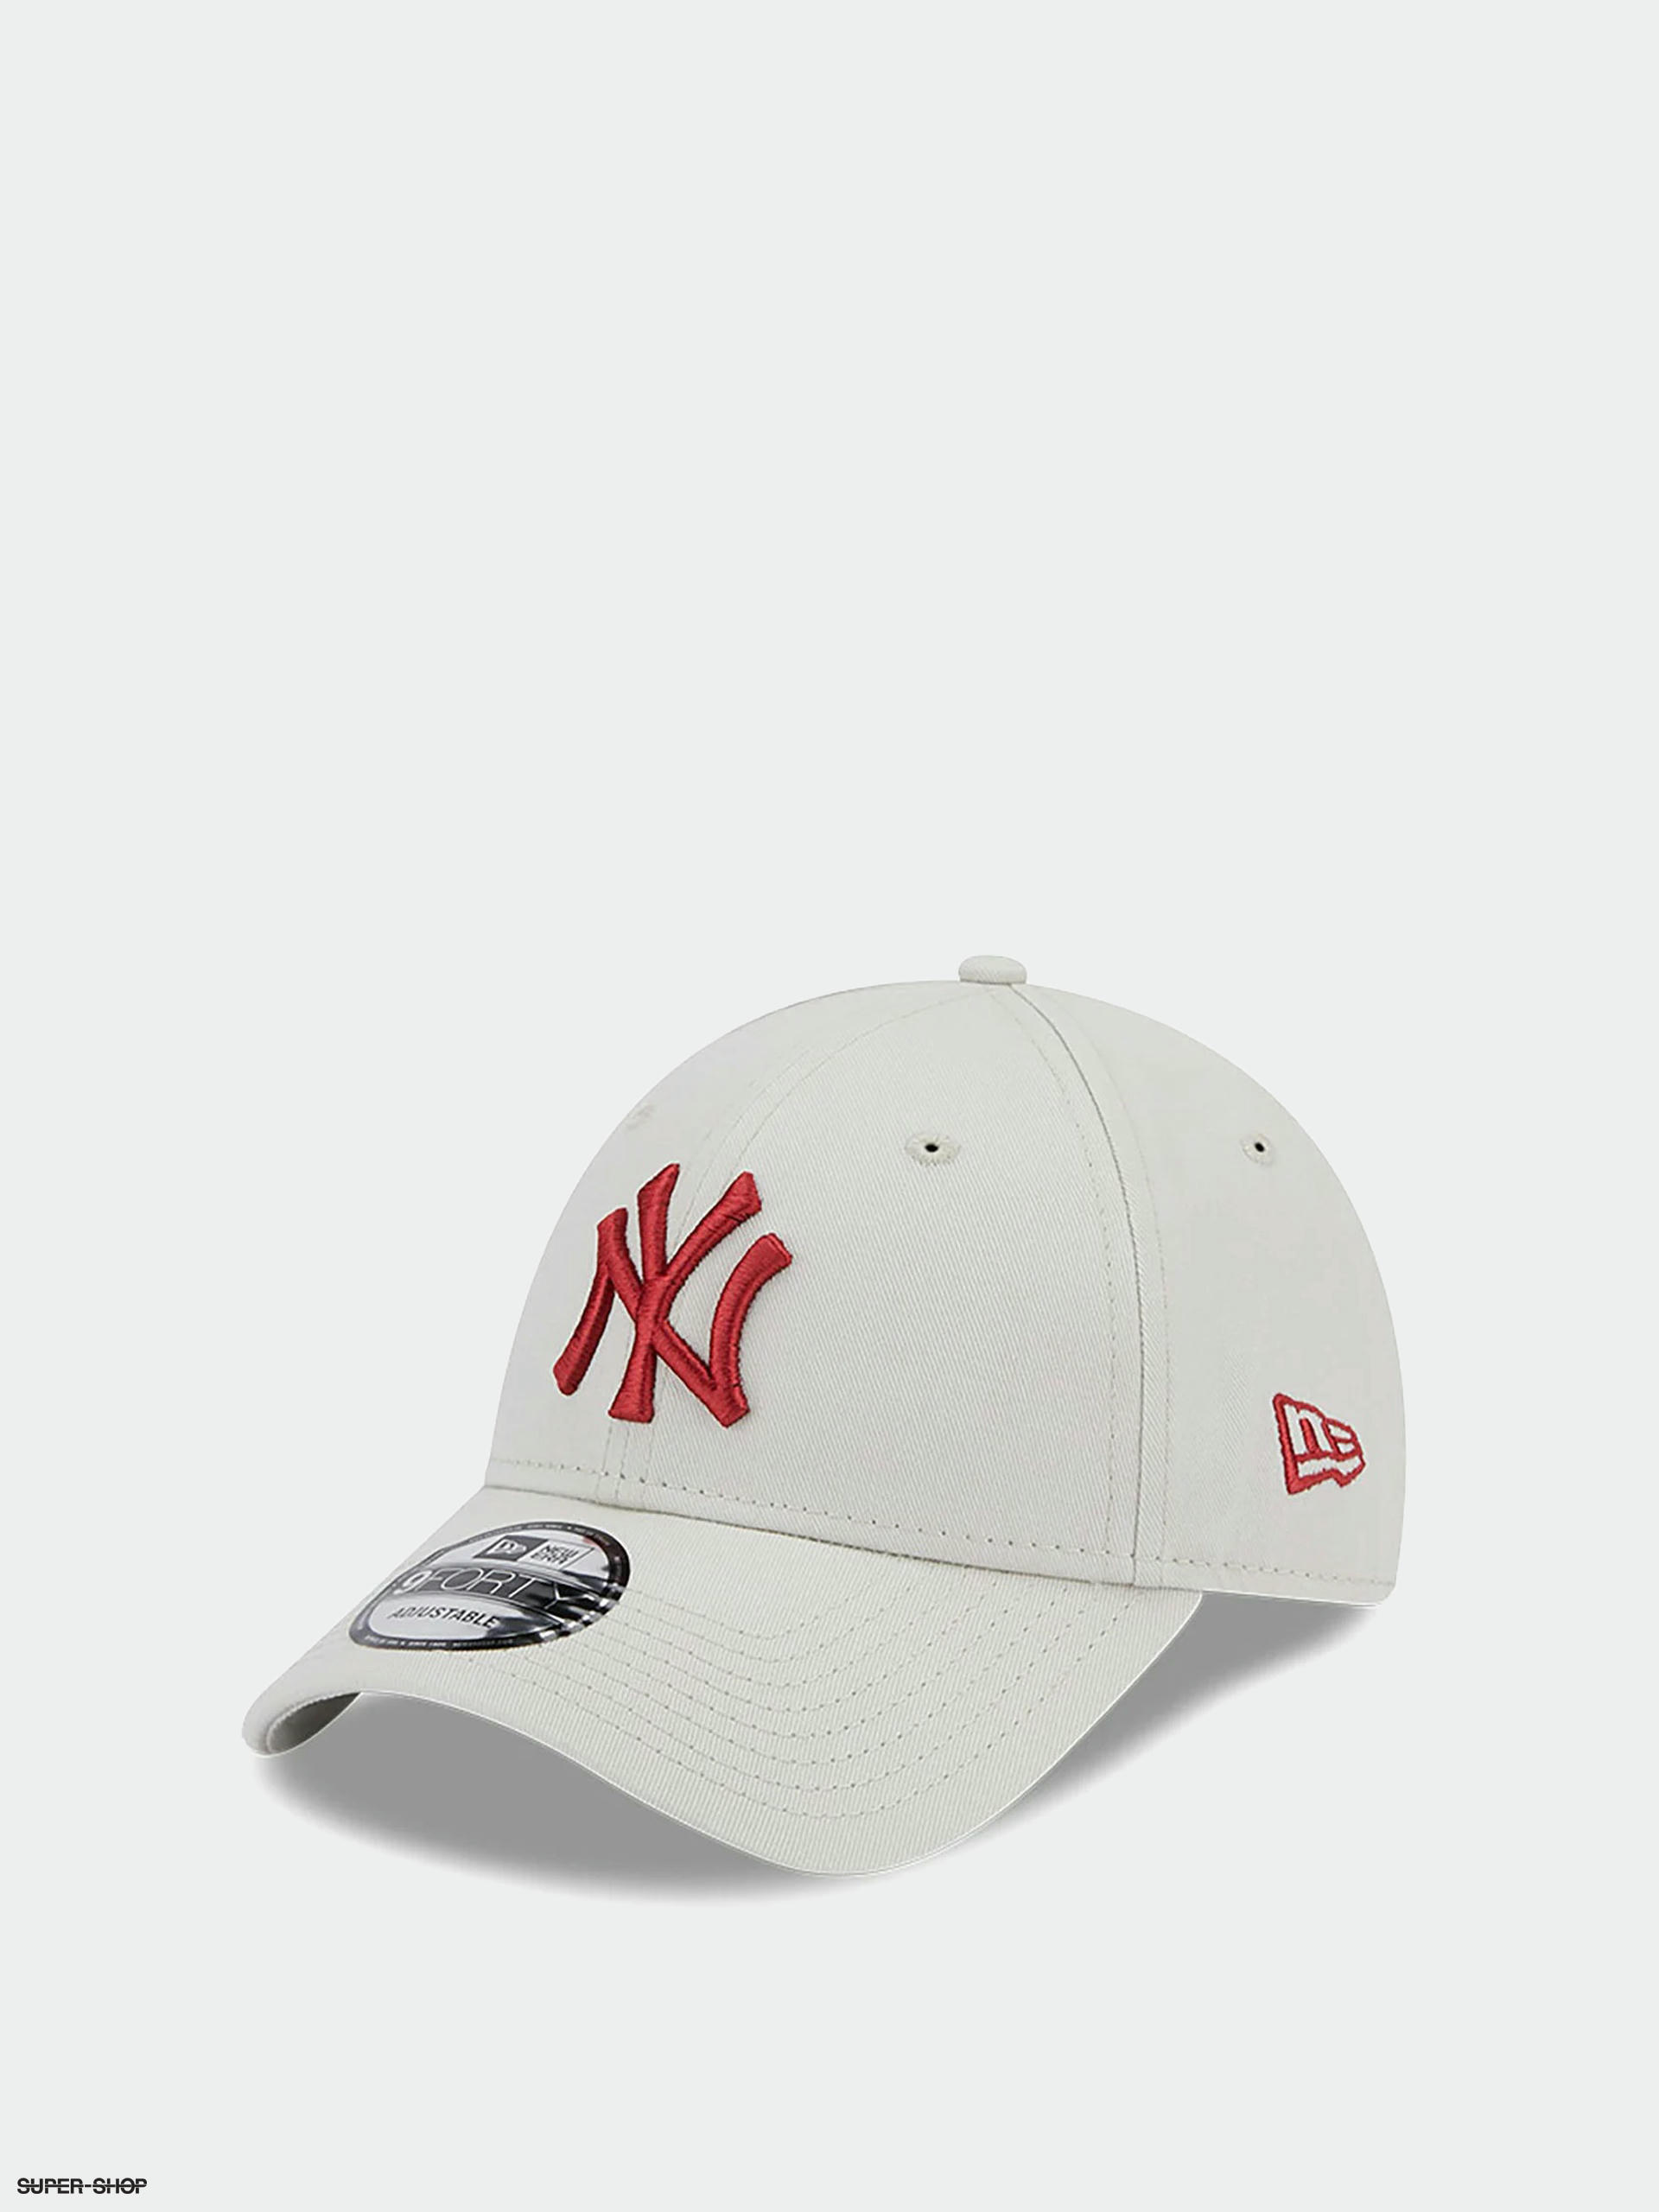 New Era 9FORTY Essential New York Yankees Cap - Red